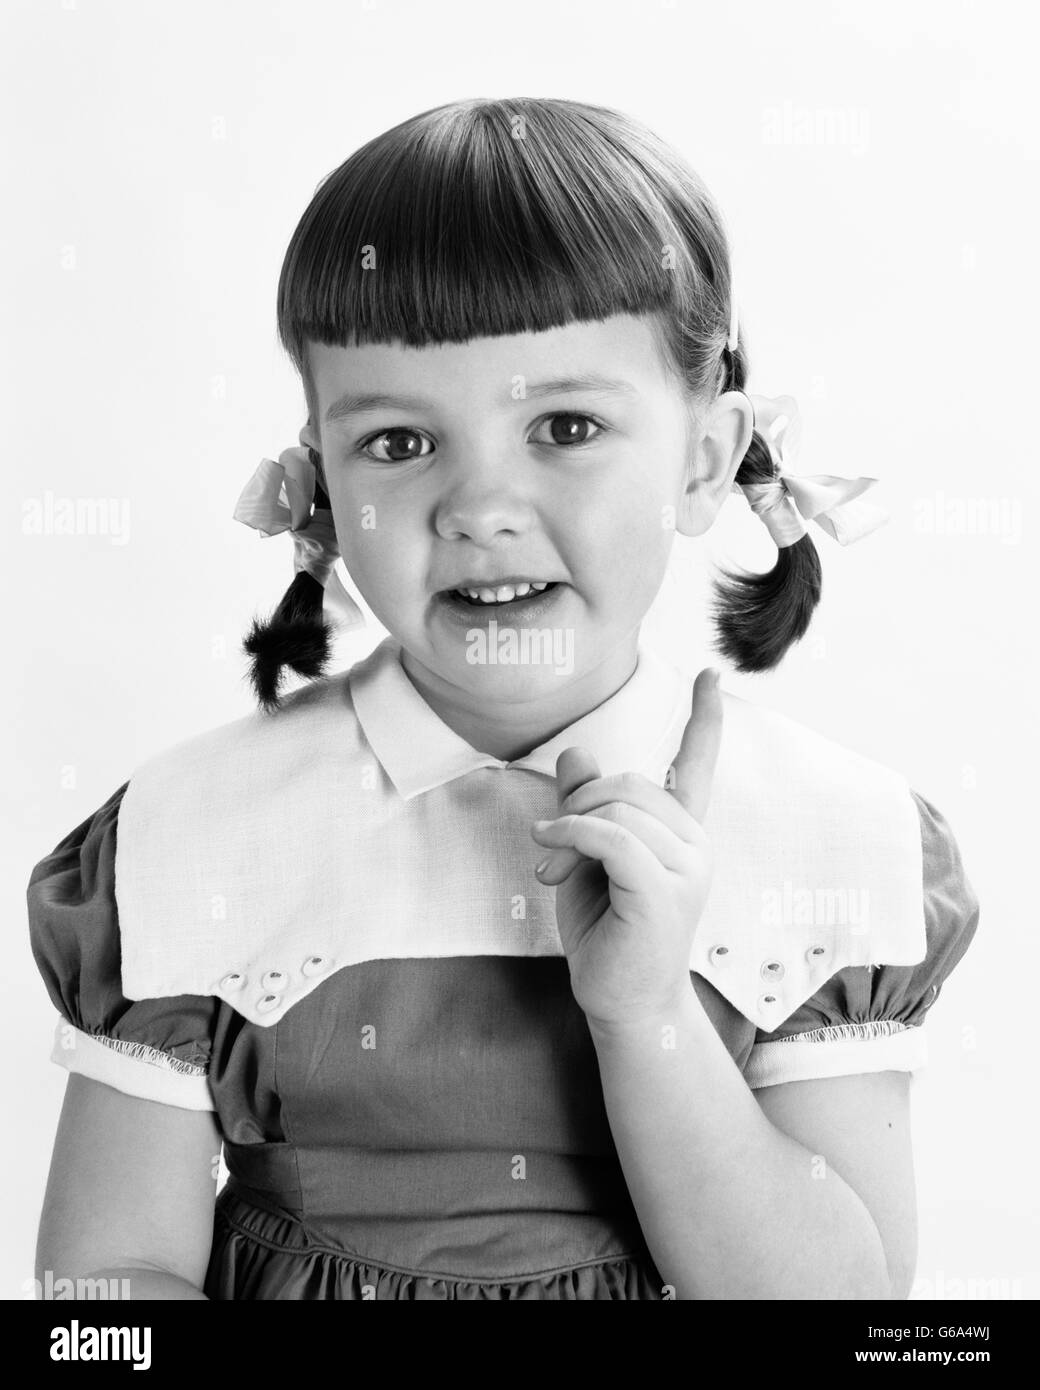 1950s PORTRAIT SMILING GIRL HAIR IN PIGTAILS POINTING FINGER LOOKING AT CAMERA Stock Photo